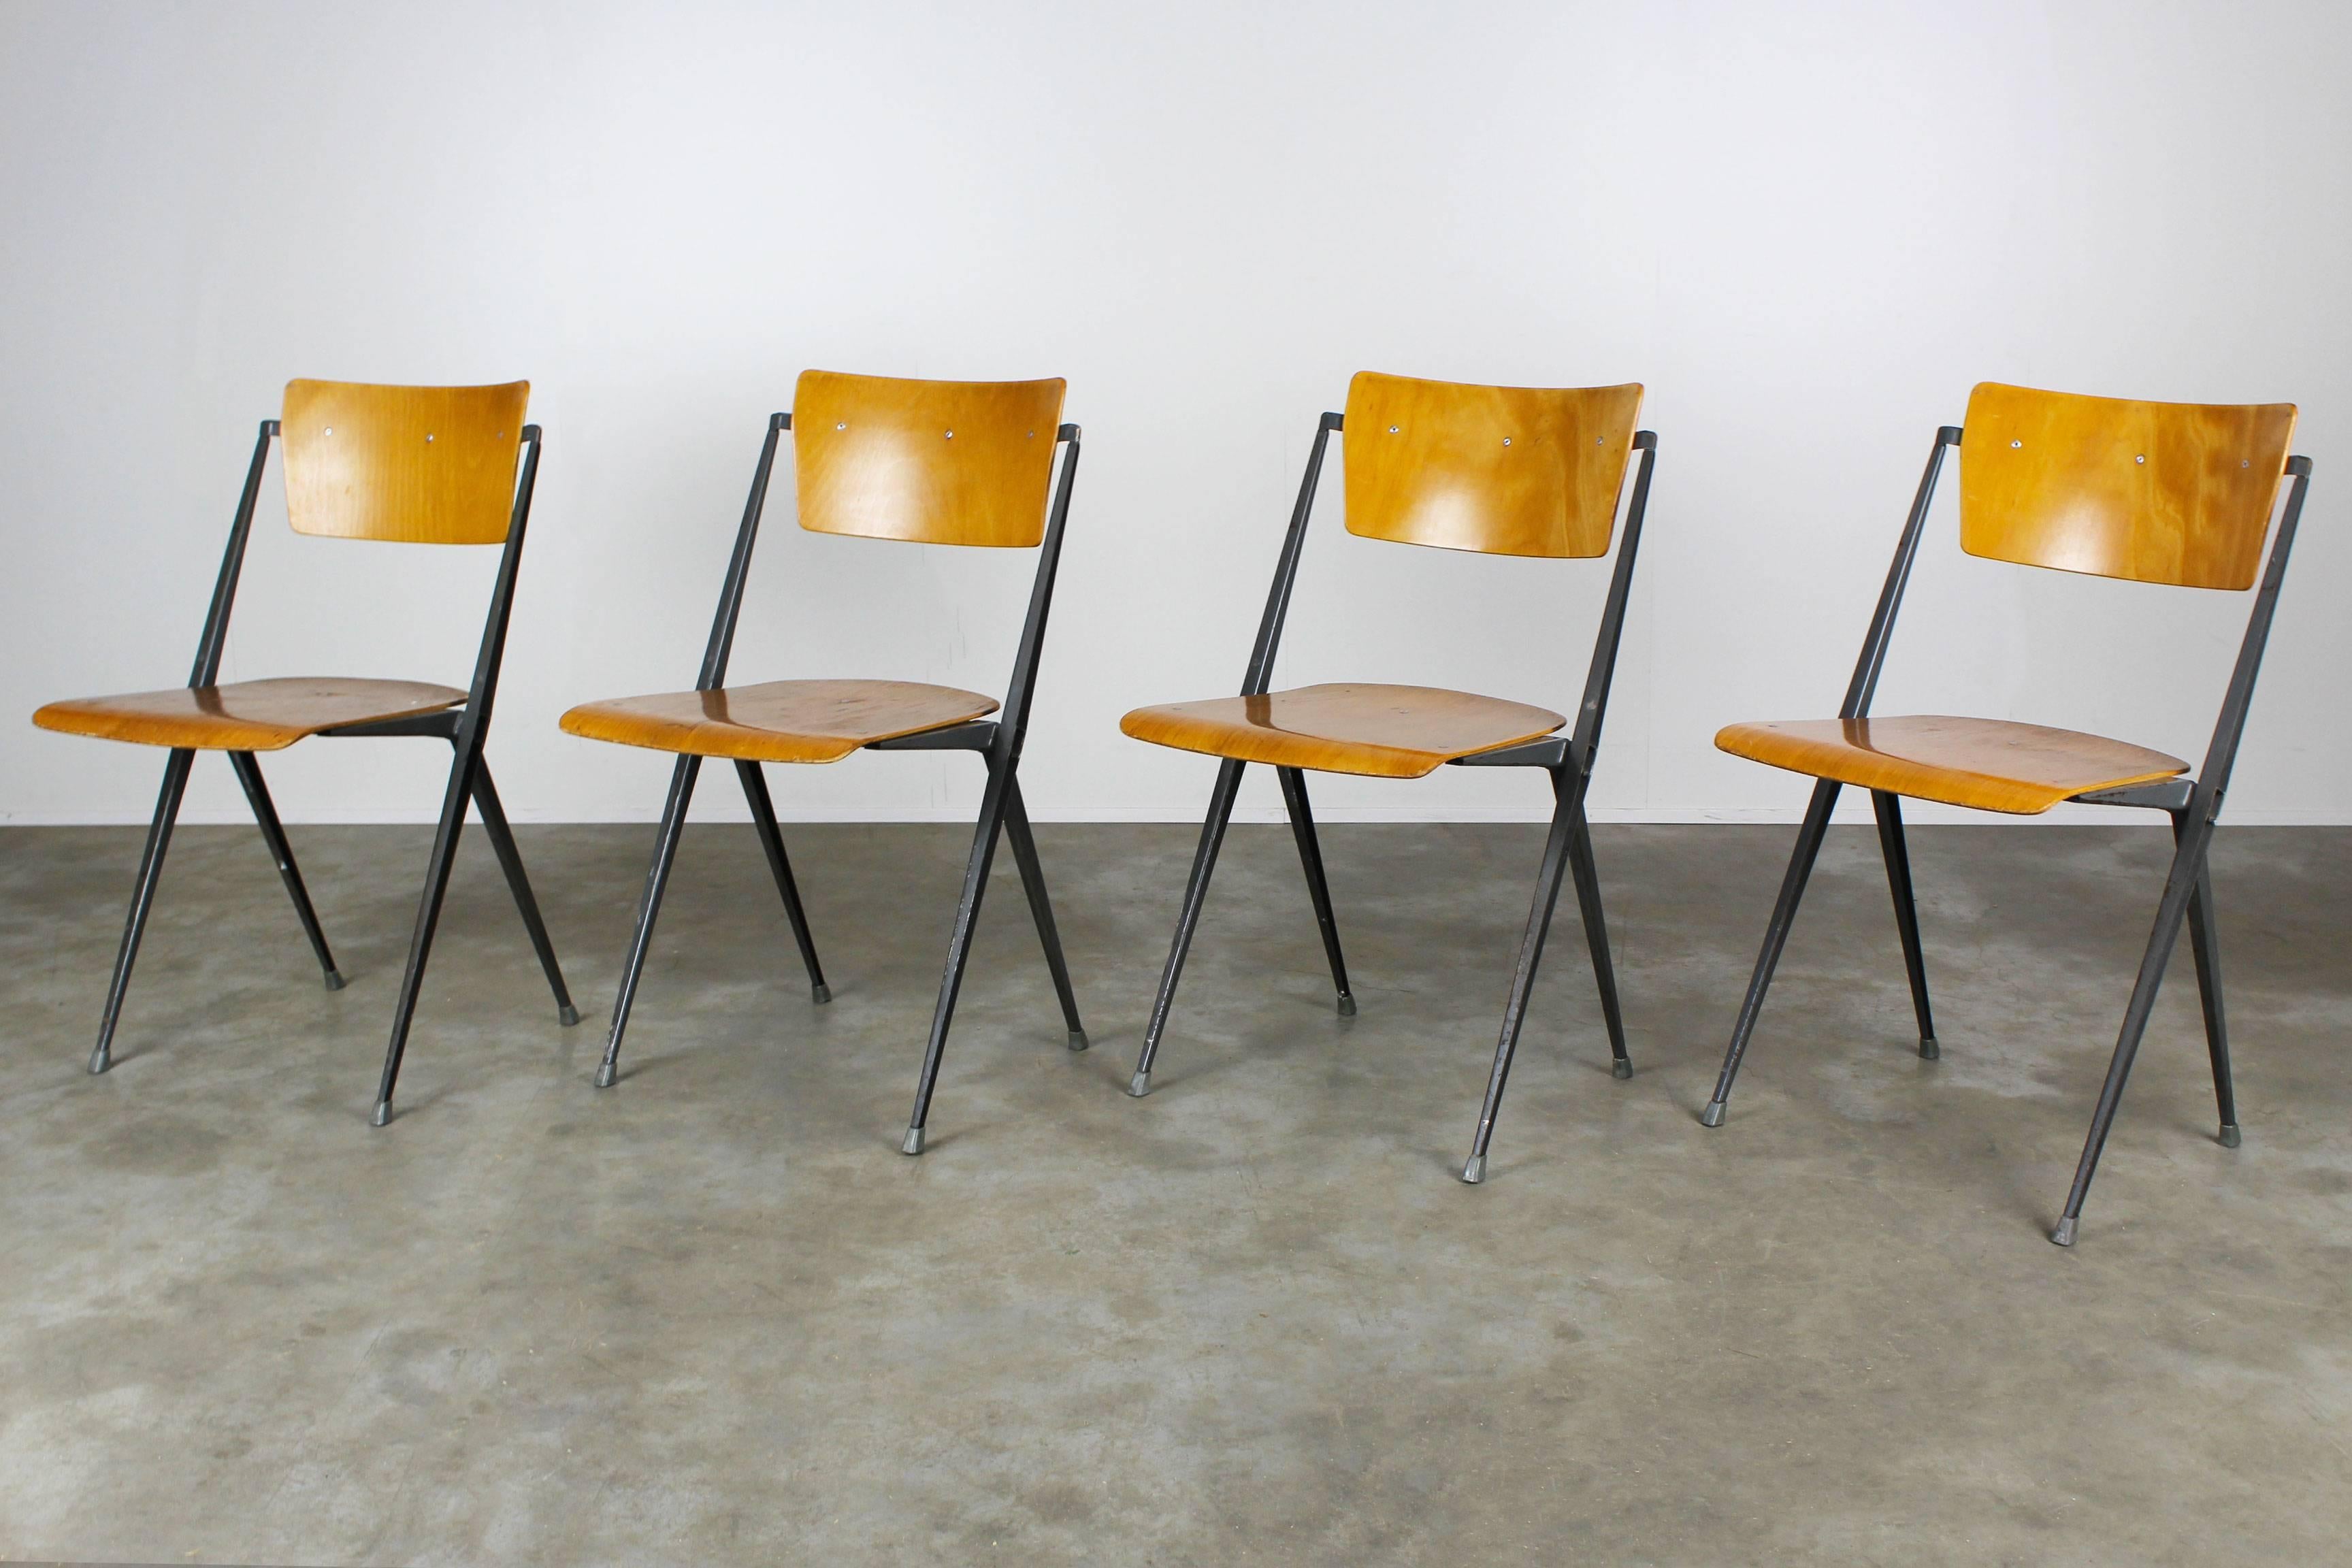 Metal Set of Four Pyramid Chairs Designed by Wim Rietveld for Ahrend de Cirkel, 1963 For Sale